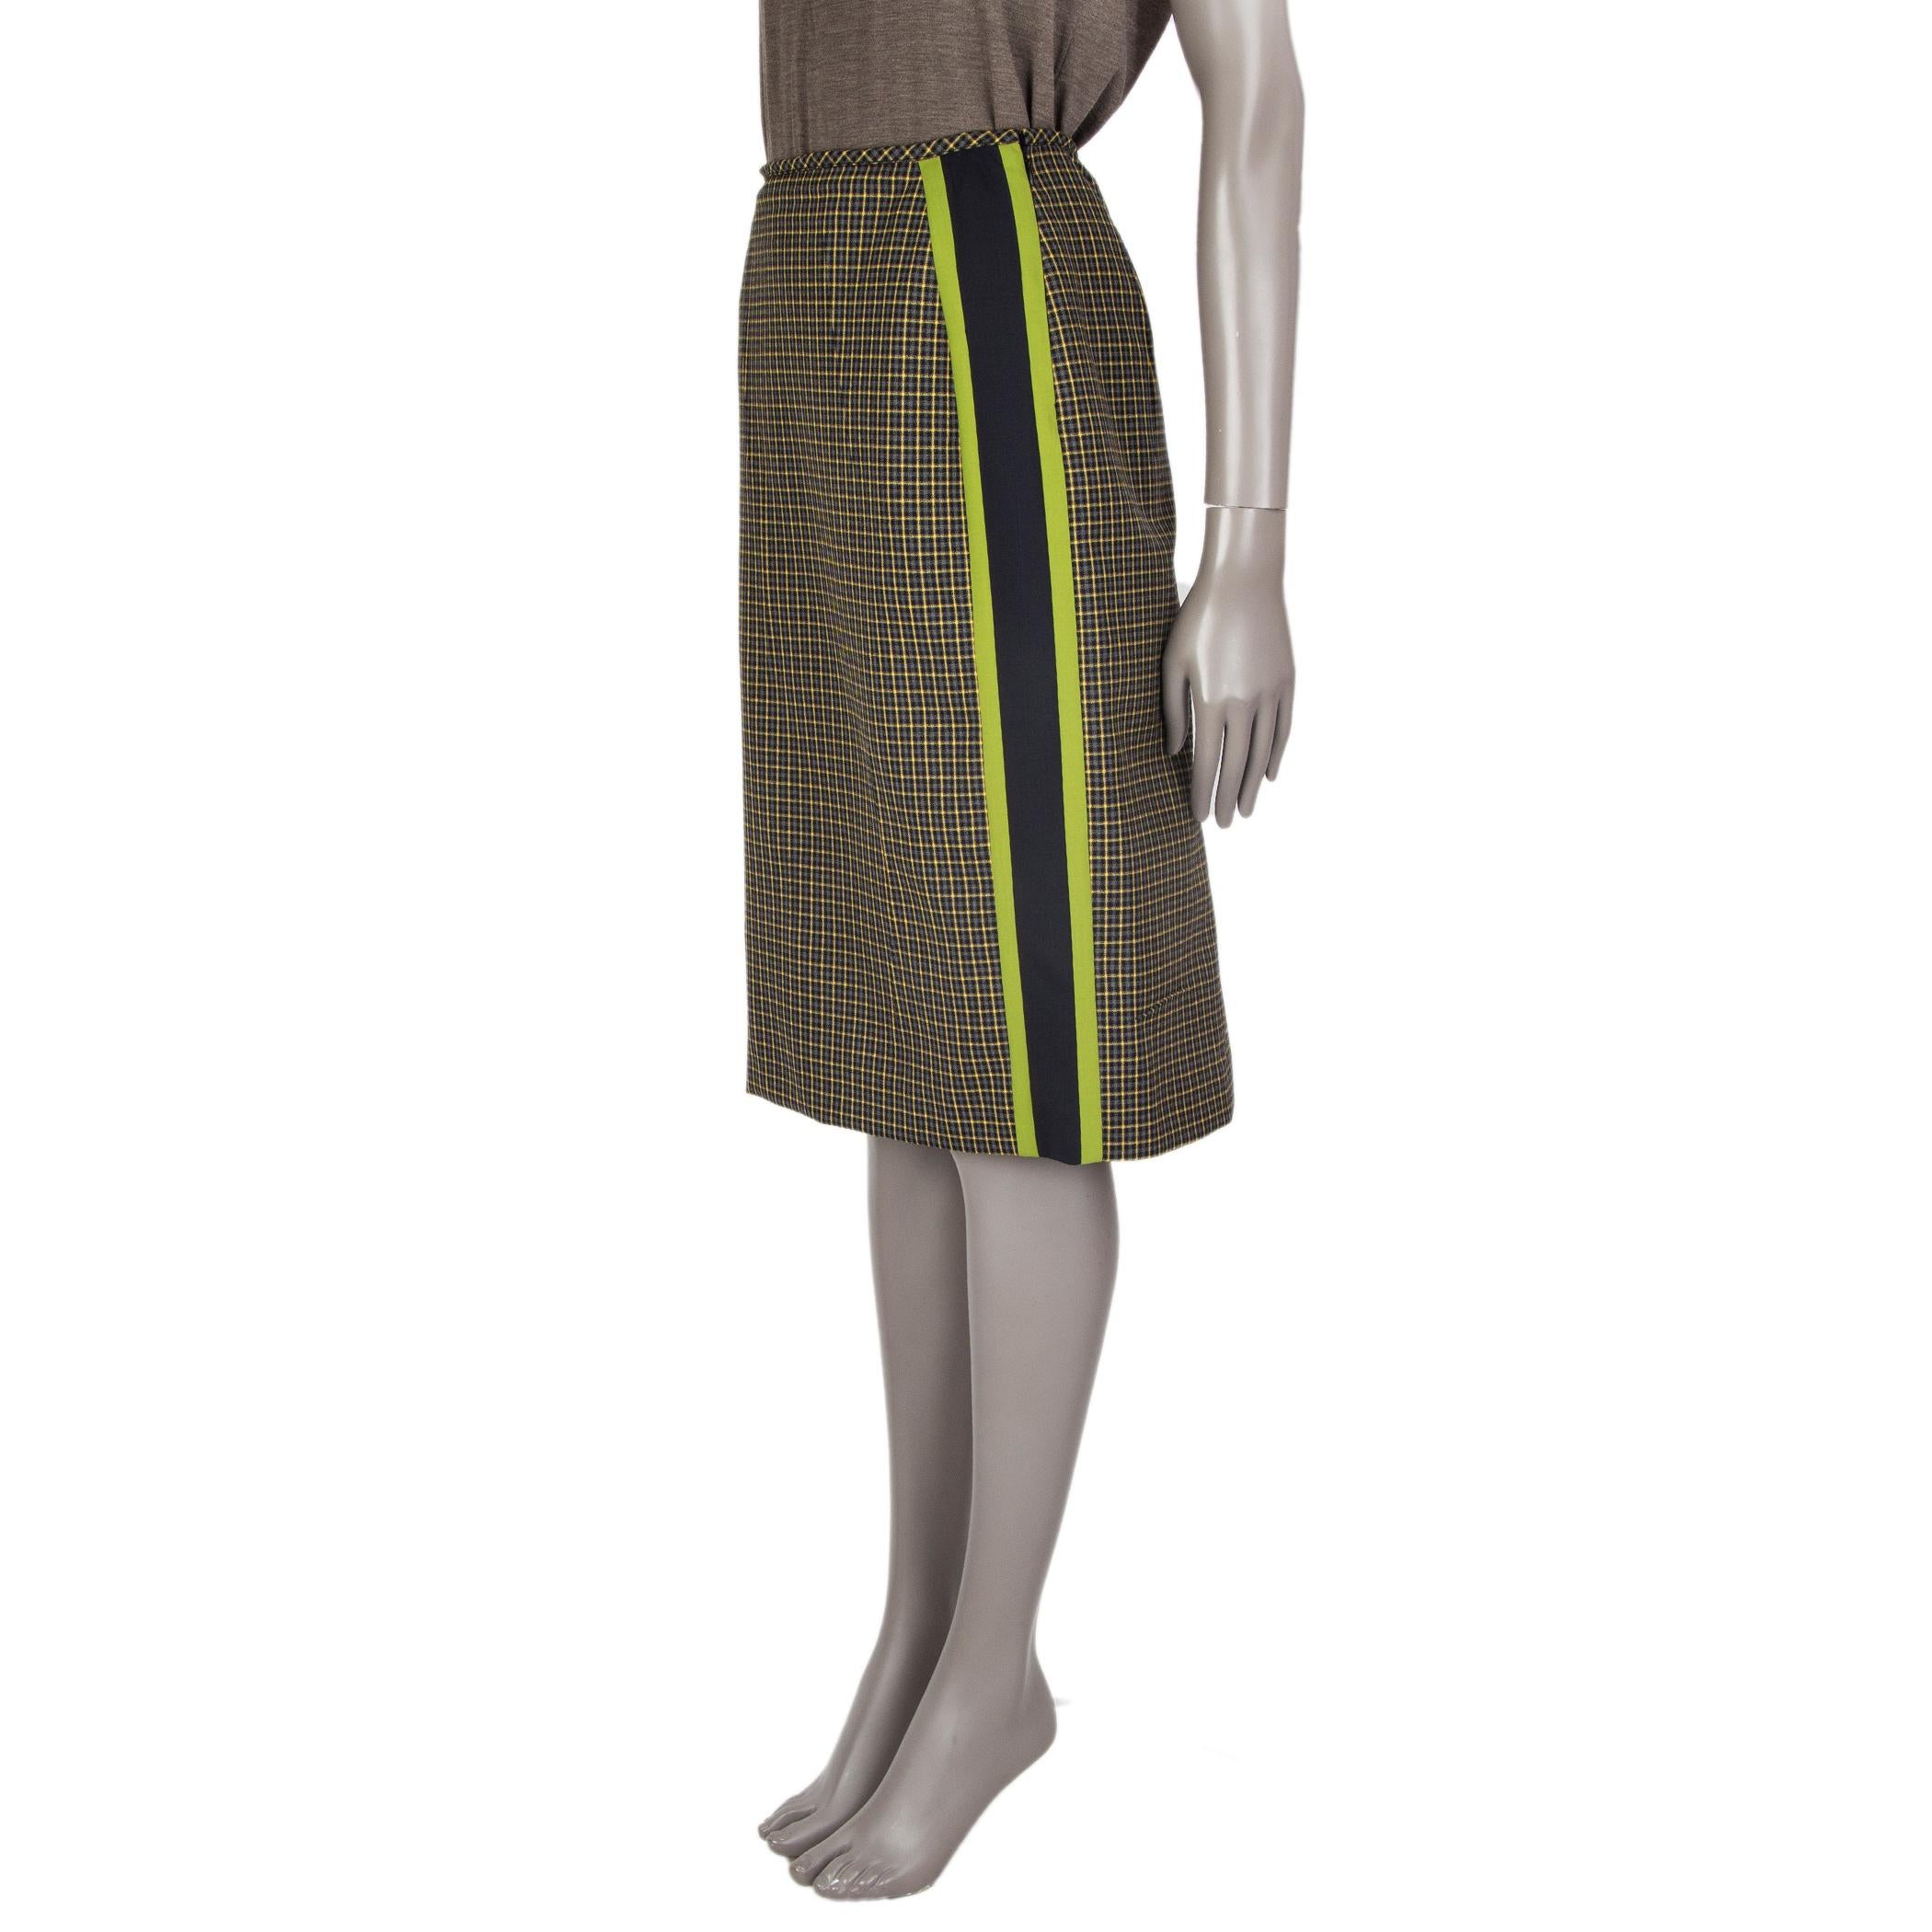 Prada plaid midi skirt in midnight blue, grey, chartreuse, yellow wool (100%). With a straight fit, slit on the back and detailed with panels on the side in midnight-blue and chartreuse. Closes with a zipper on the lefts side. Lining viscose (100%).